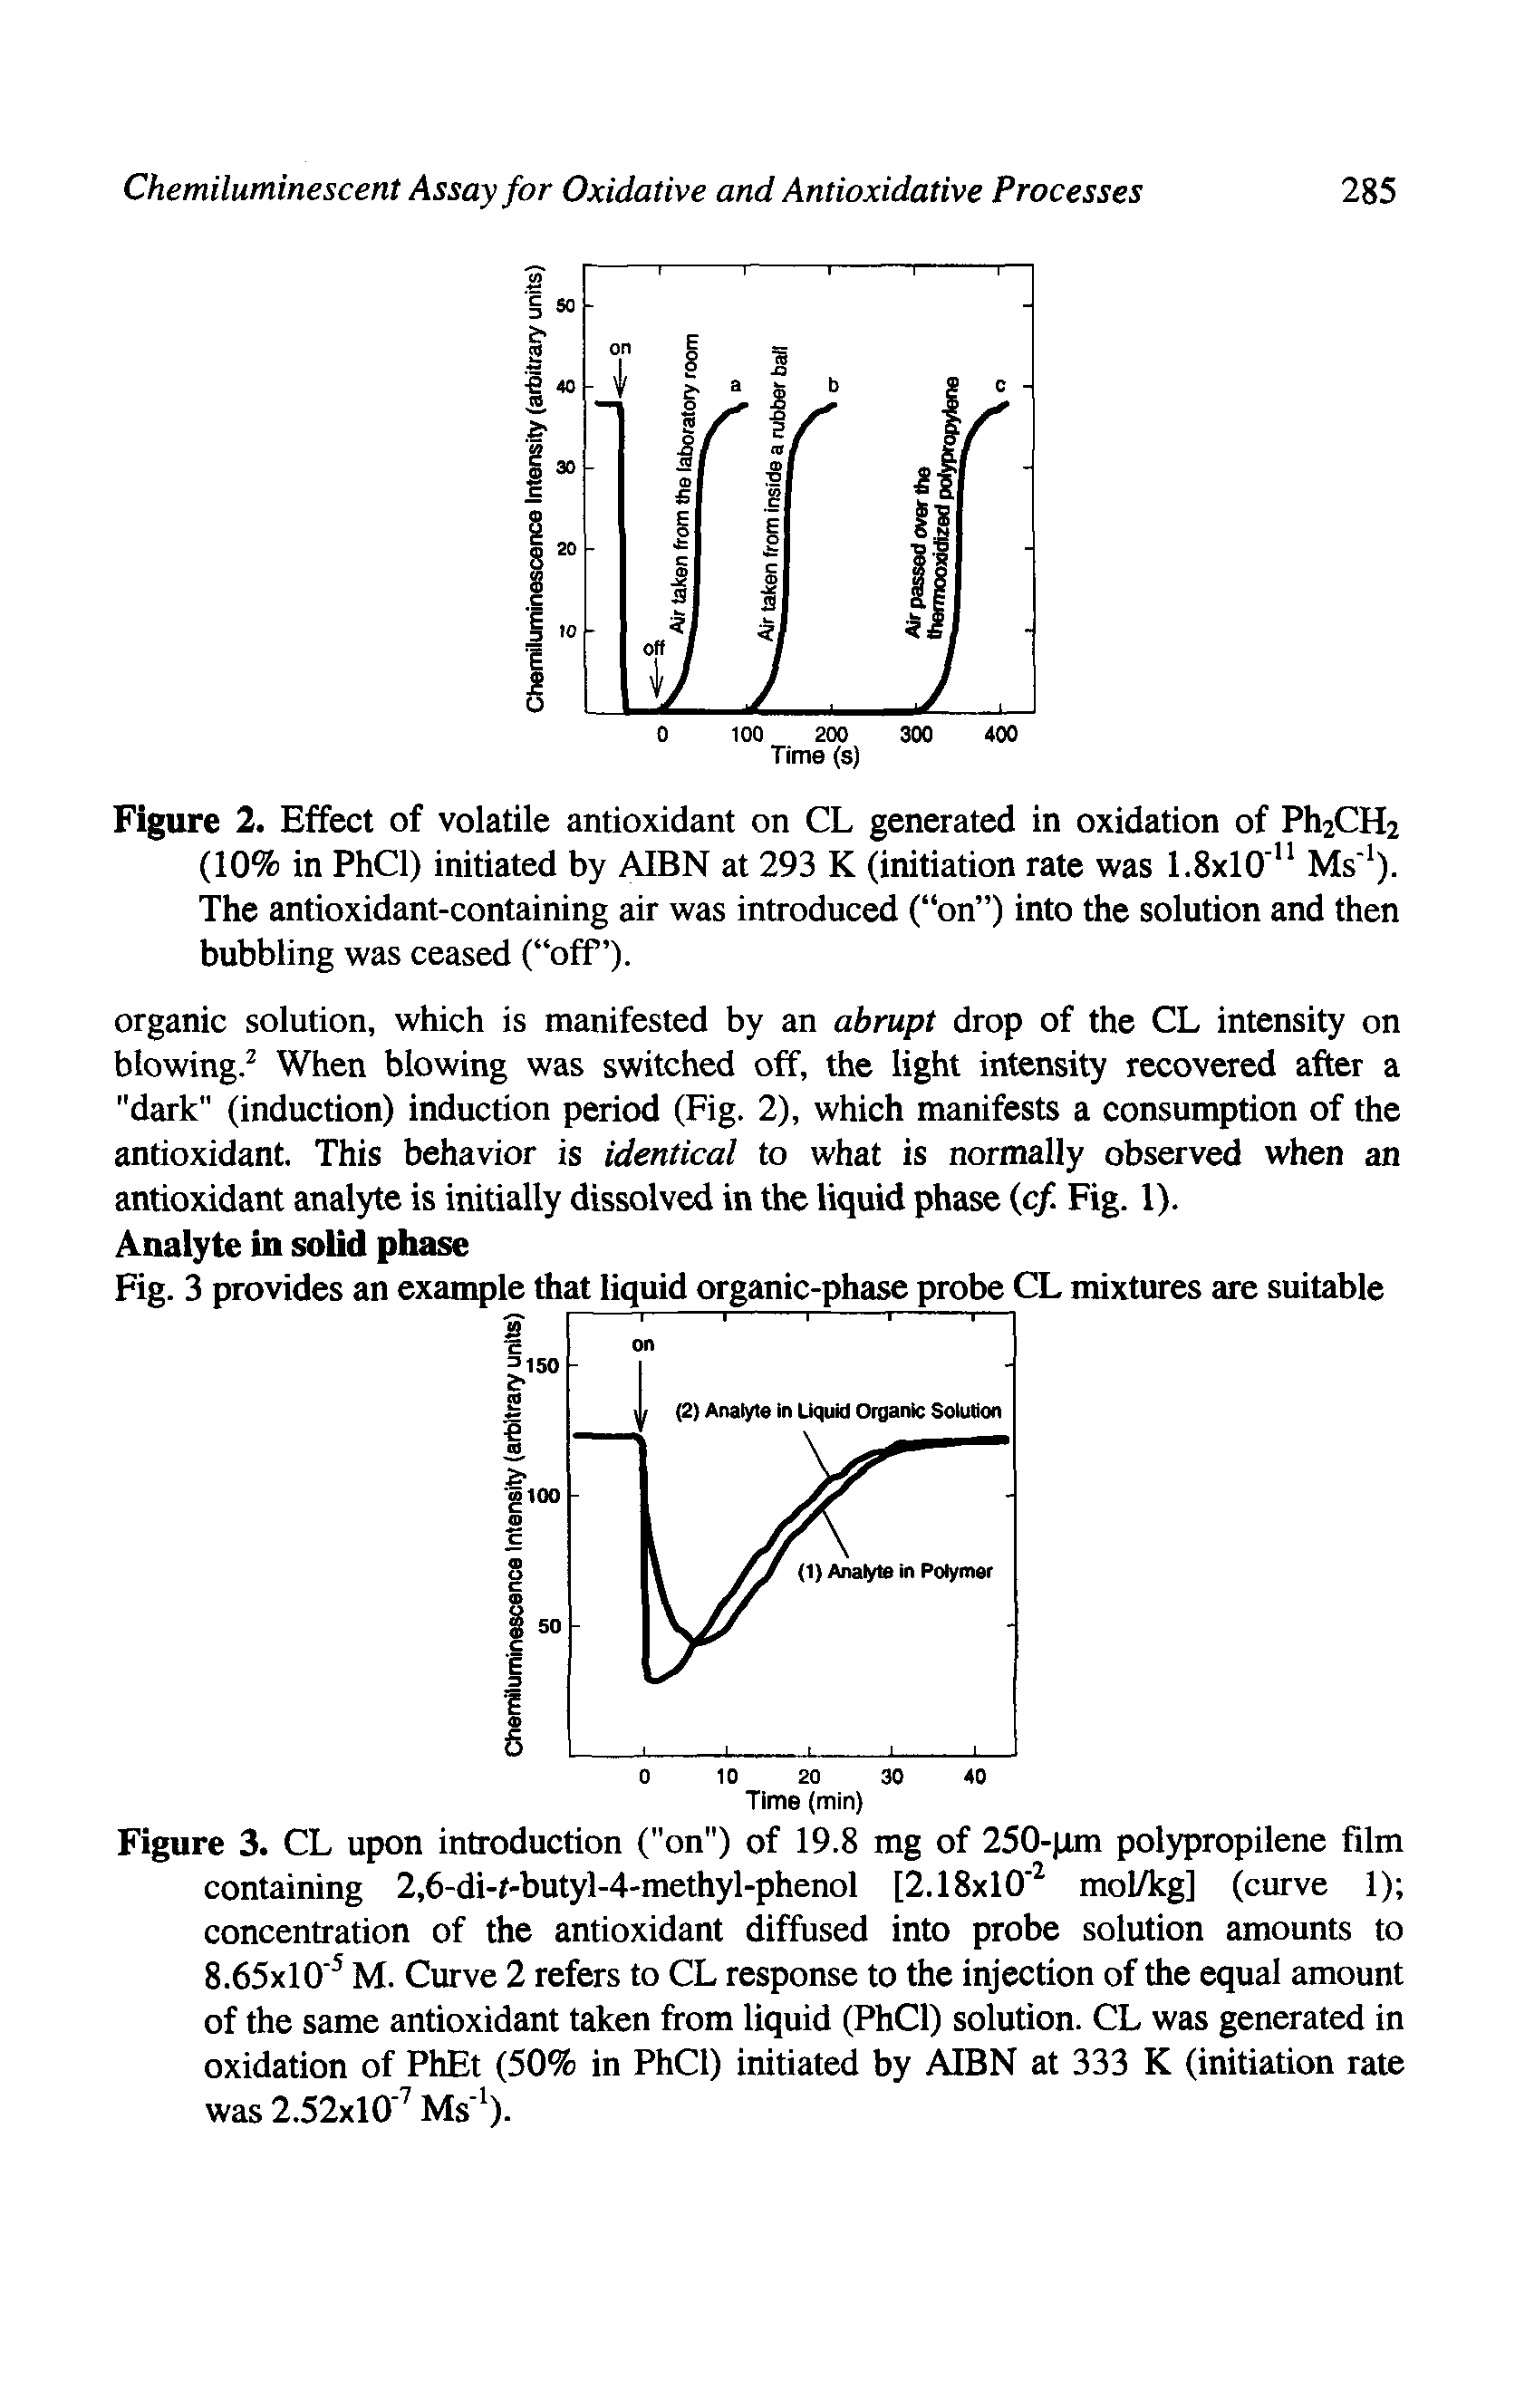 Figure 3. CL upon introduction ("on") of 19.8 mg of 250- jm polypropilene film containing 2,6-di-f-butyl-4-methyl-phenol [2.18x10 mol/kg] (curve 1) concentration of the antioxidant diffused into probe solution amounts to 8.65x10 M. Curve 2 refers to CL response to the injection of the equal amount of the same antioxidant taken from liquid (PhCl) solution. CL was generated in oxidation of PhEt (50% in PhCl) initiated by AIBN at 333 K (initiation rate was 2.52x10 Ms ).